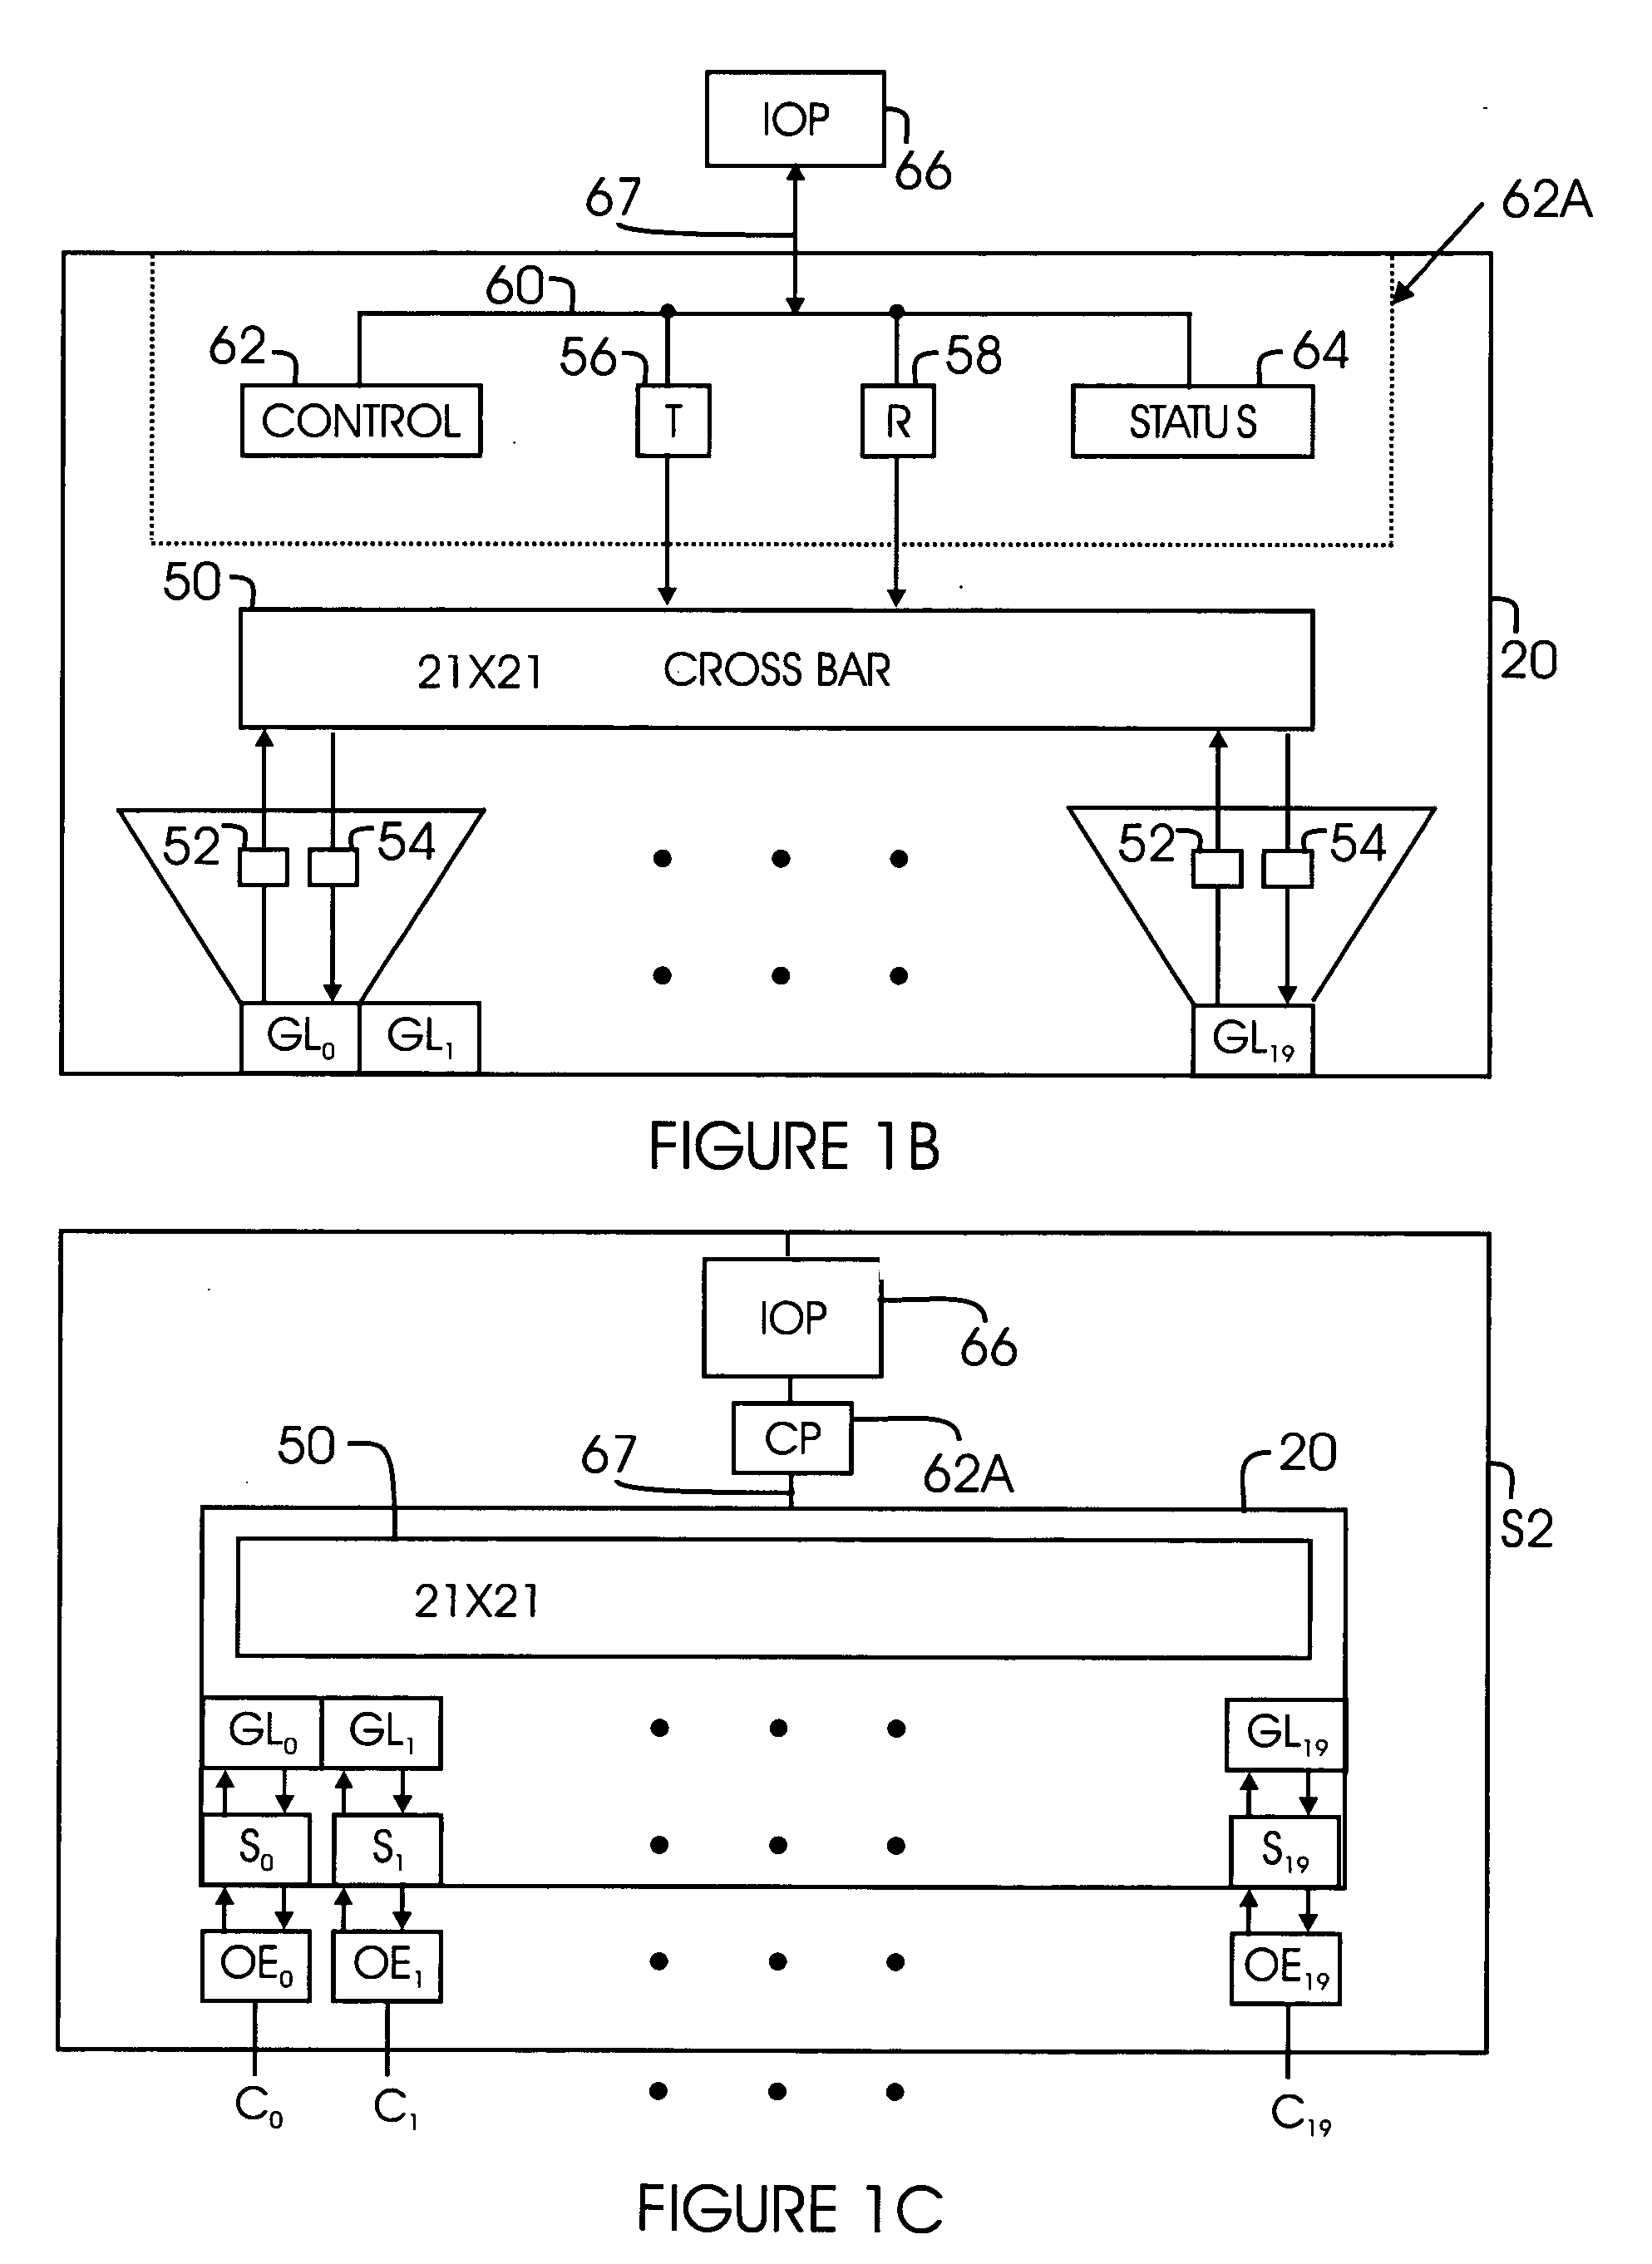 Method and system for congestion control in a fibre channel switch